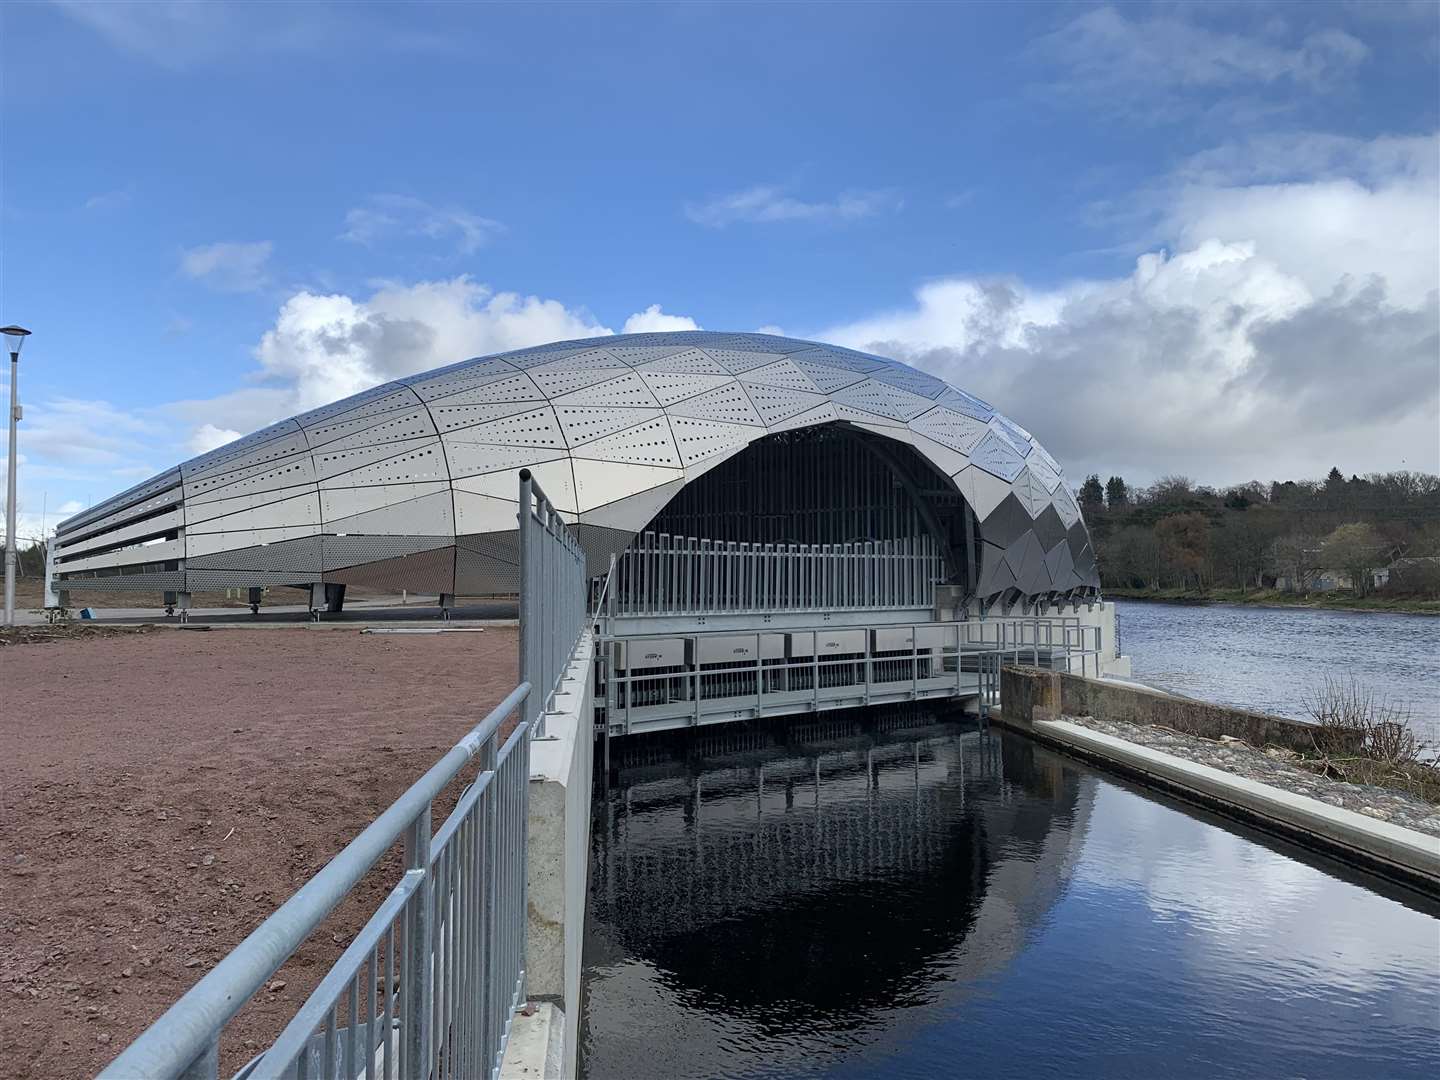 The award-winning Hydro Ness in Inverness has received funding and support from Zero Waste Scotland.